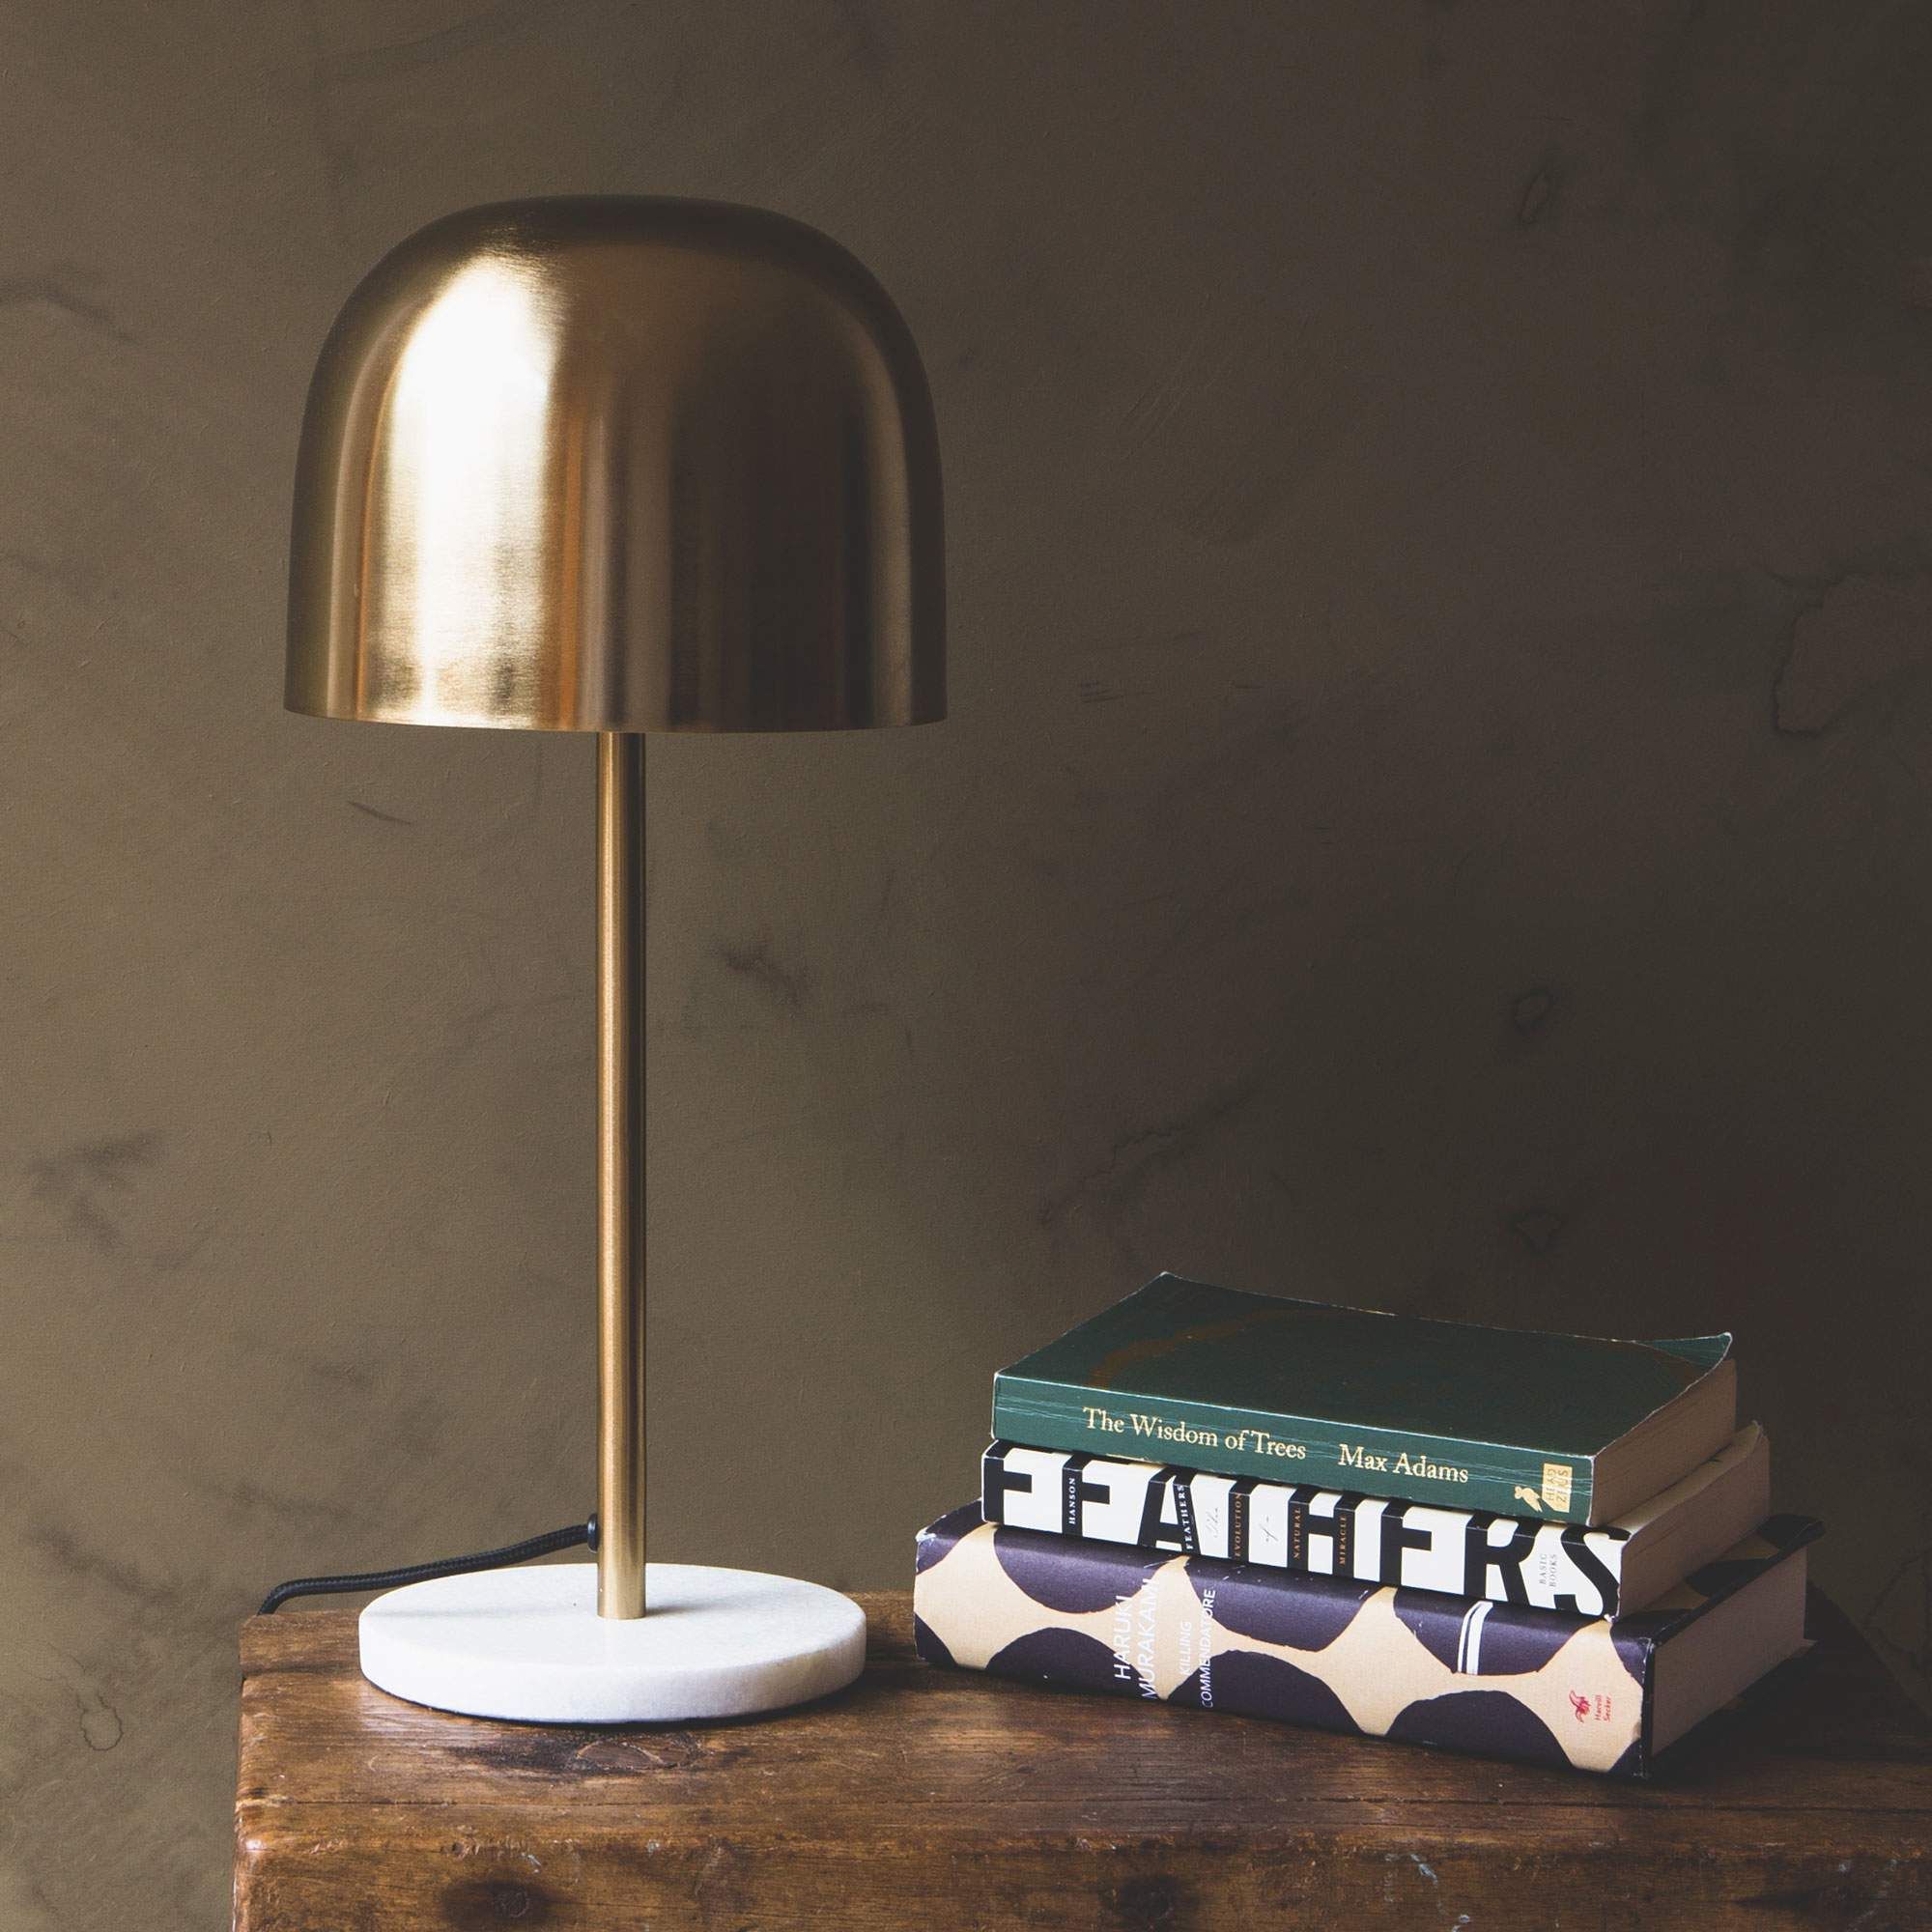 Tall Antique Brass Table Lamp With Brass Shade By Kalalou, 44% OFF